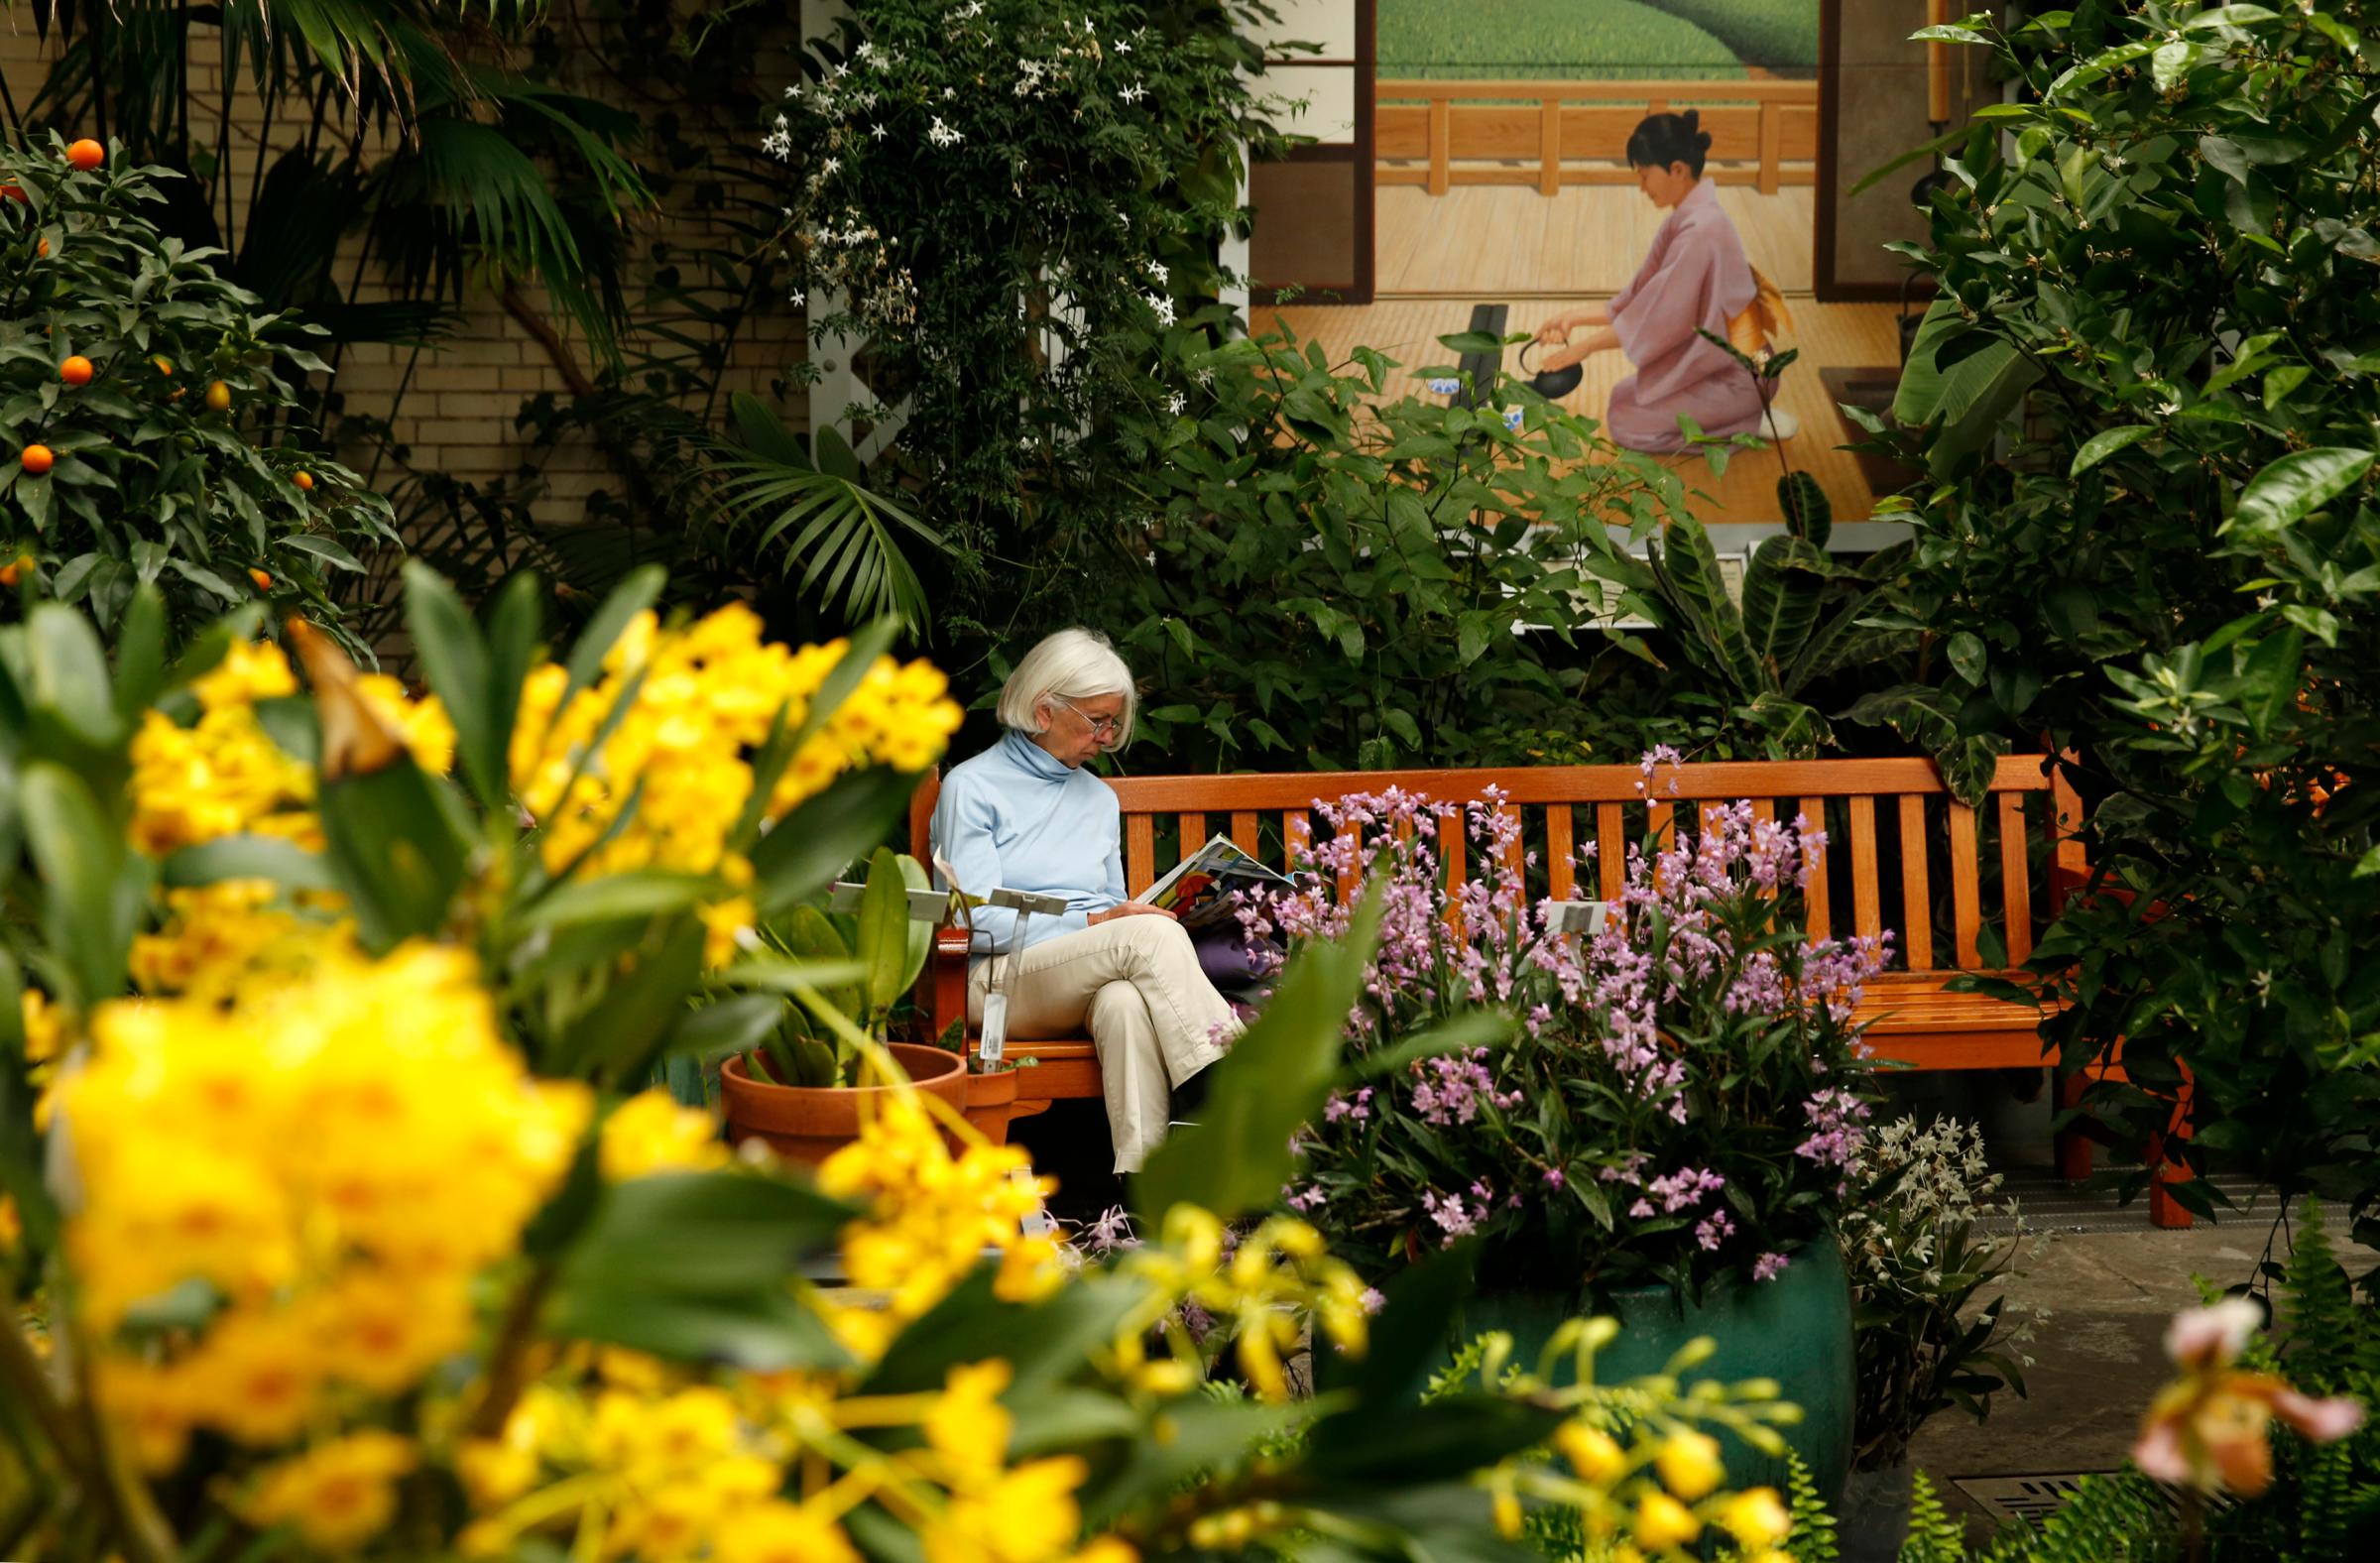 A woman reads a magazine while enjoying classical music at the exhibit "Orchid Symphony" in the conservatory of the United States Botanic Garden in Washington, D.C., on March 12, 2014.